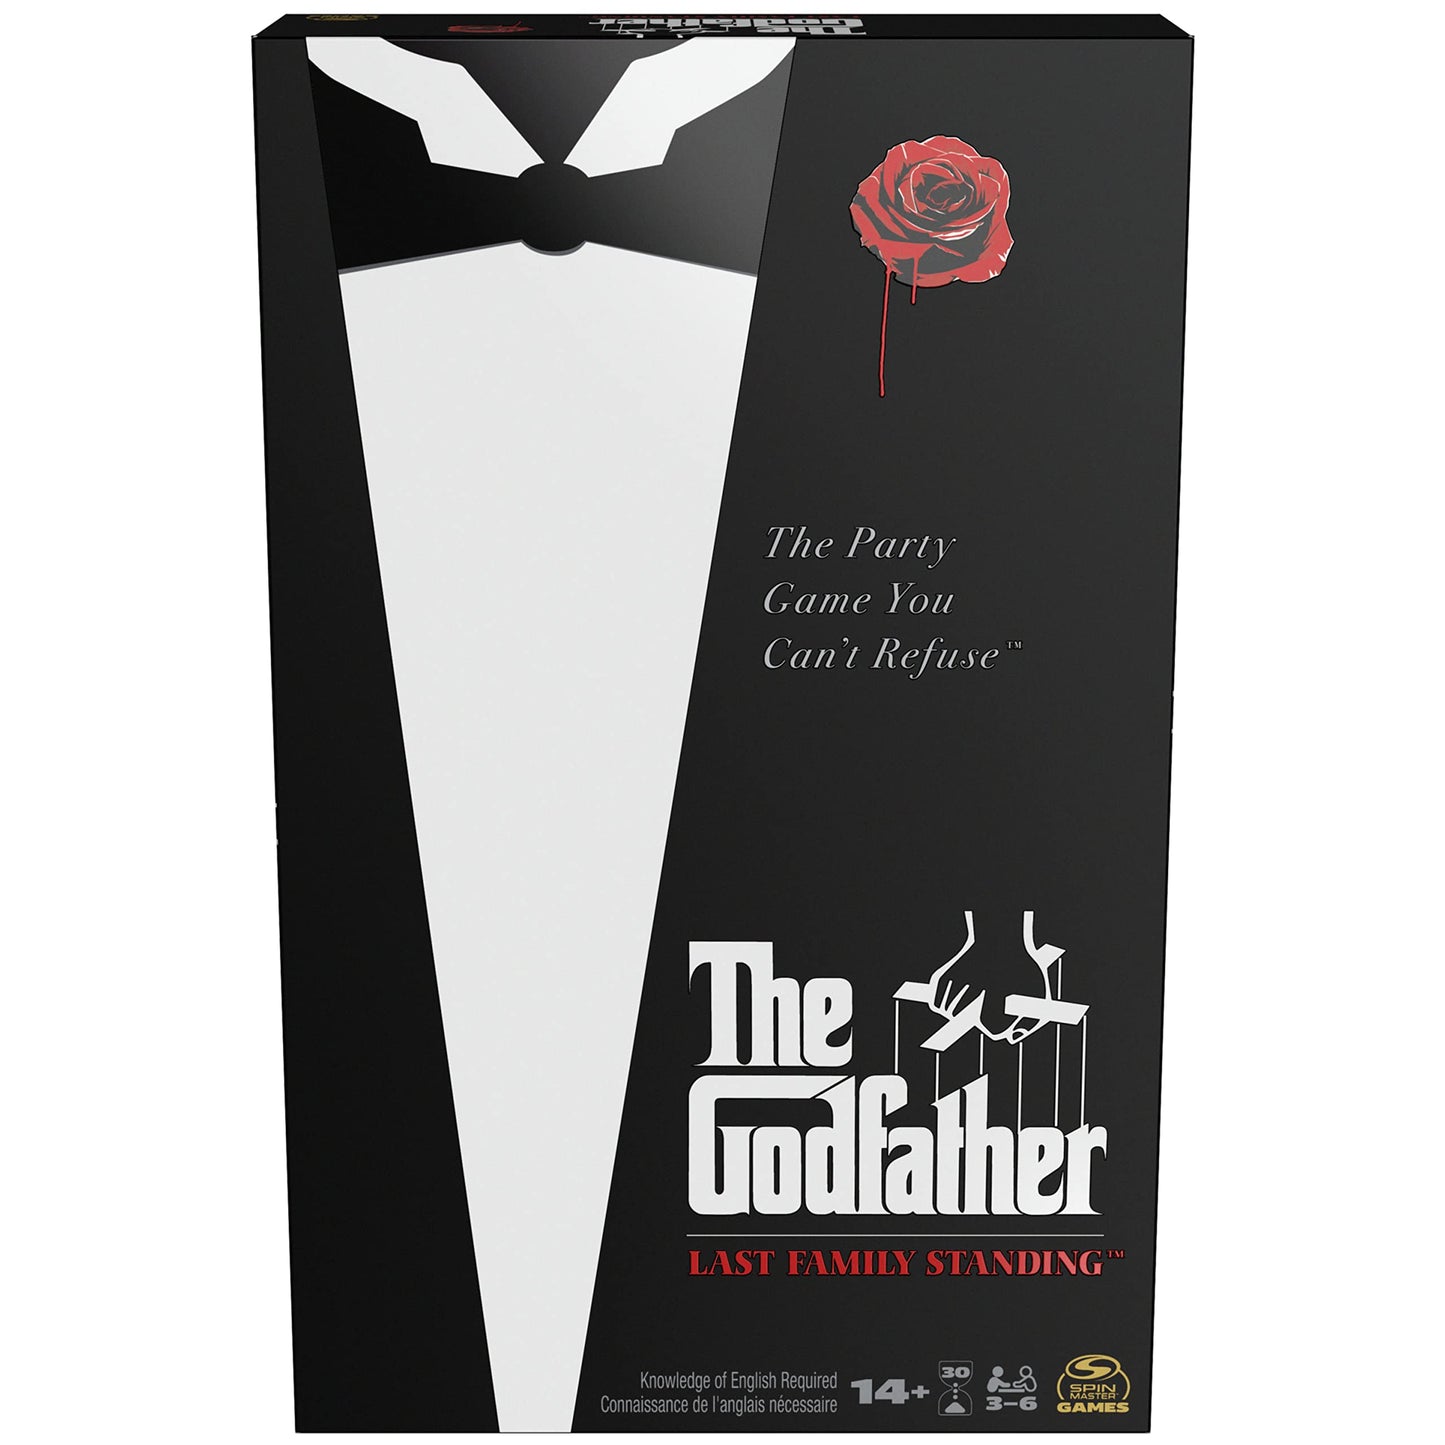 The Godfather Last Family Standing Game